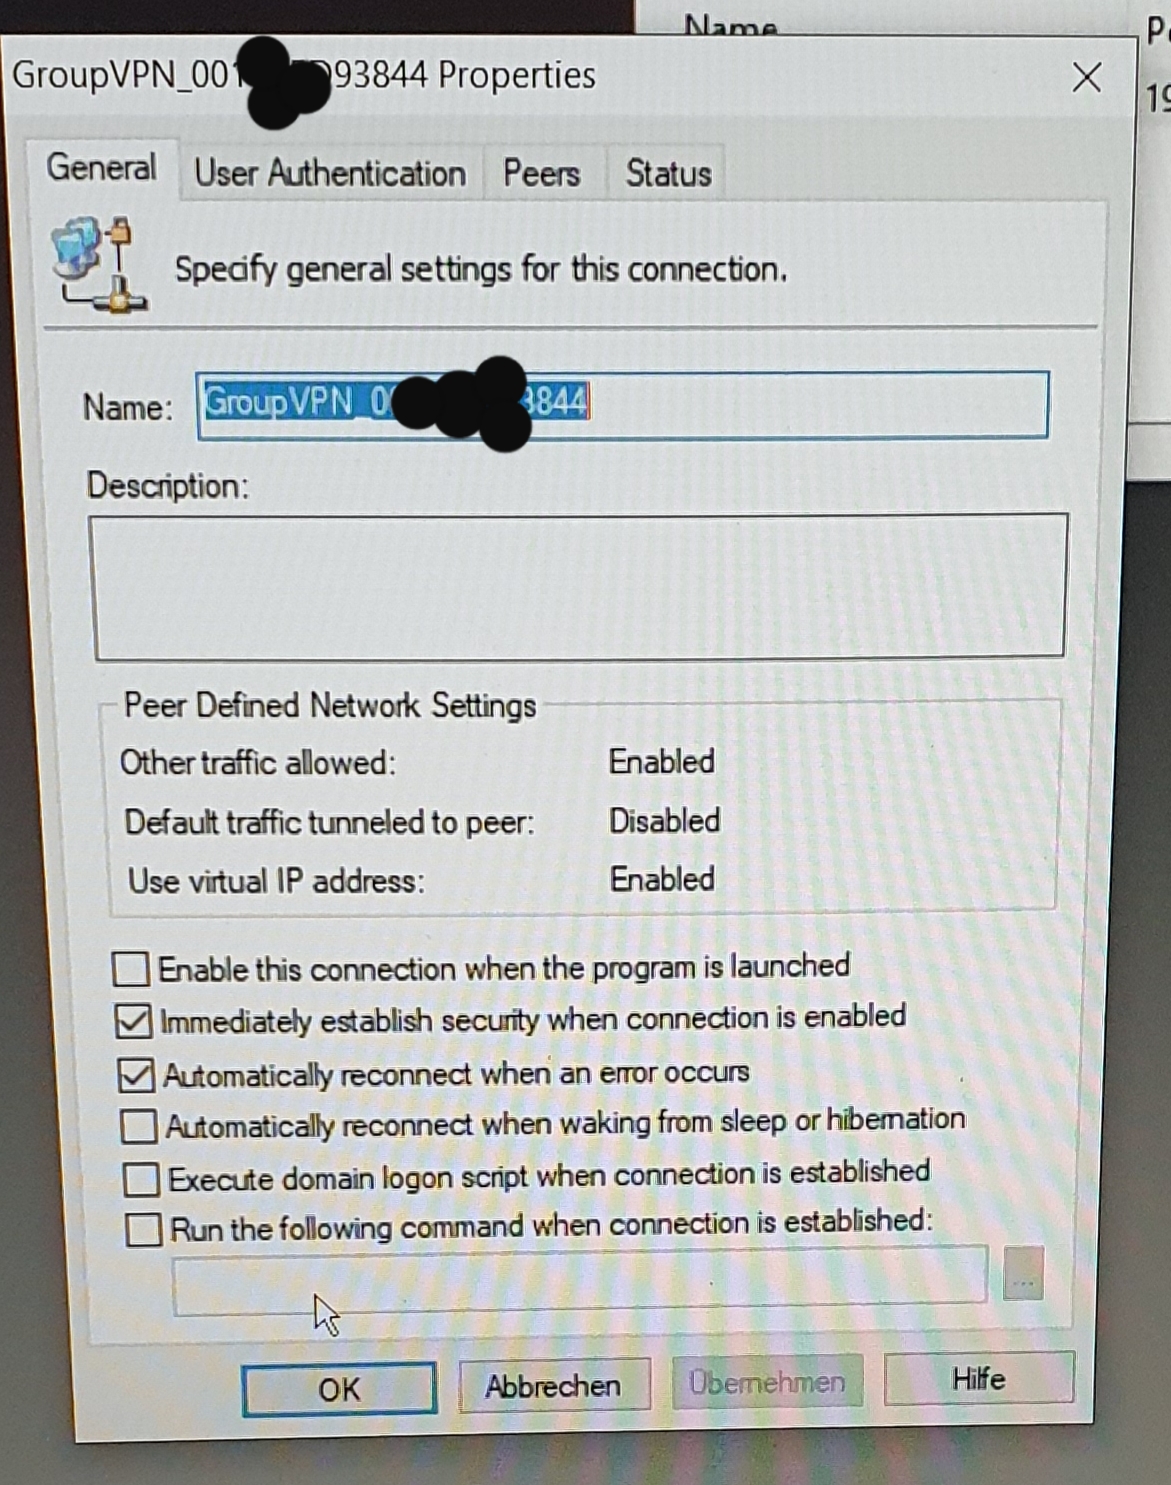 dell sonicwall global vpn client